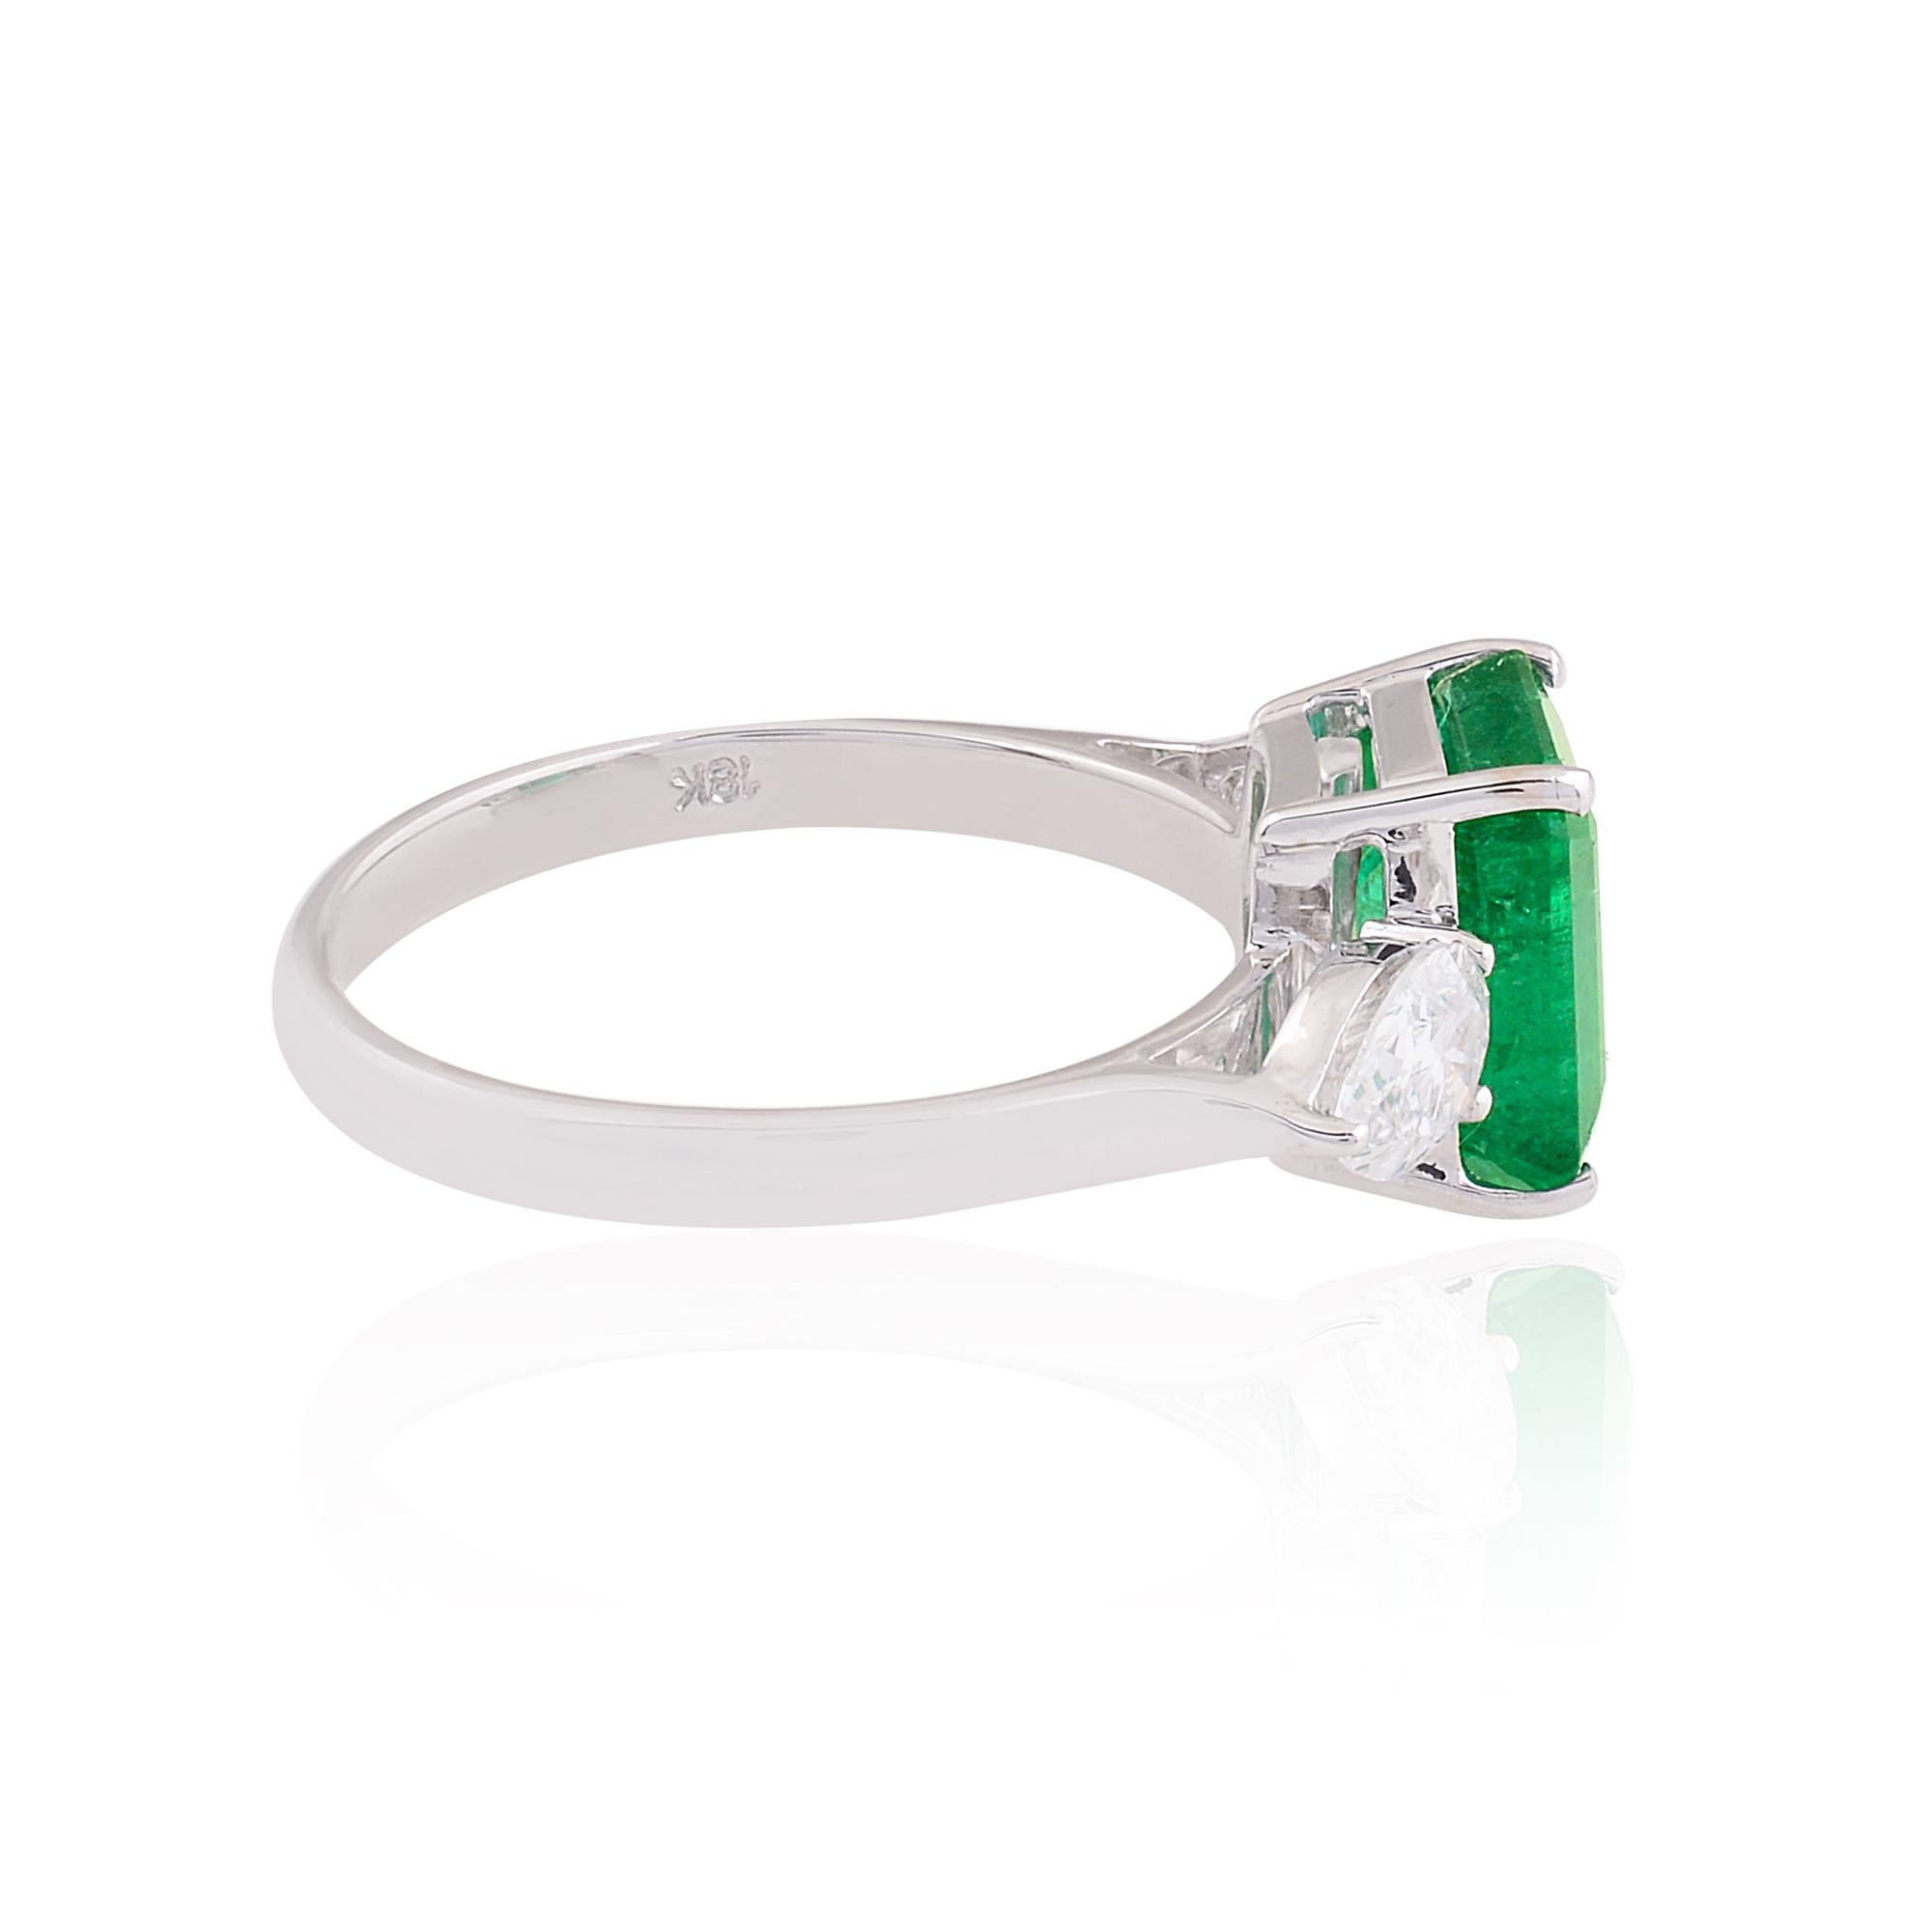 For Sale:  Natural Emerald Gemstone Cocktail Ring Pear Diamond 18 Karat White Gold Jewelry 2